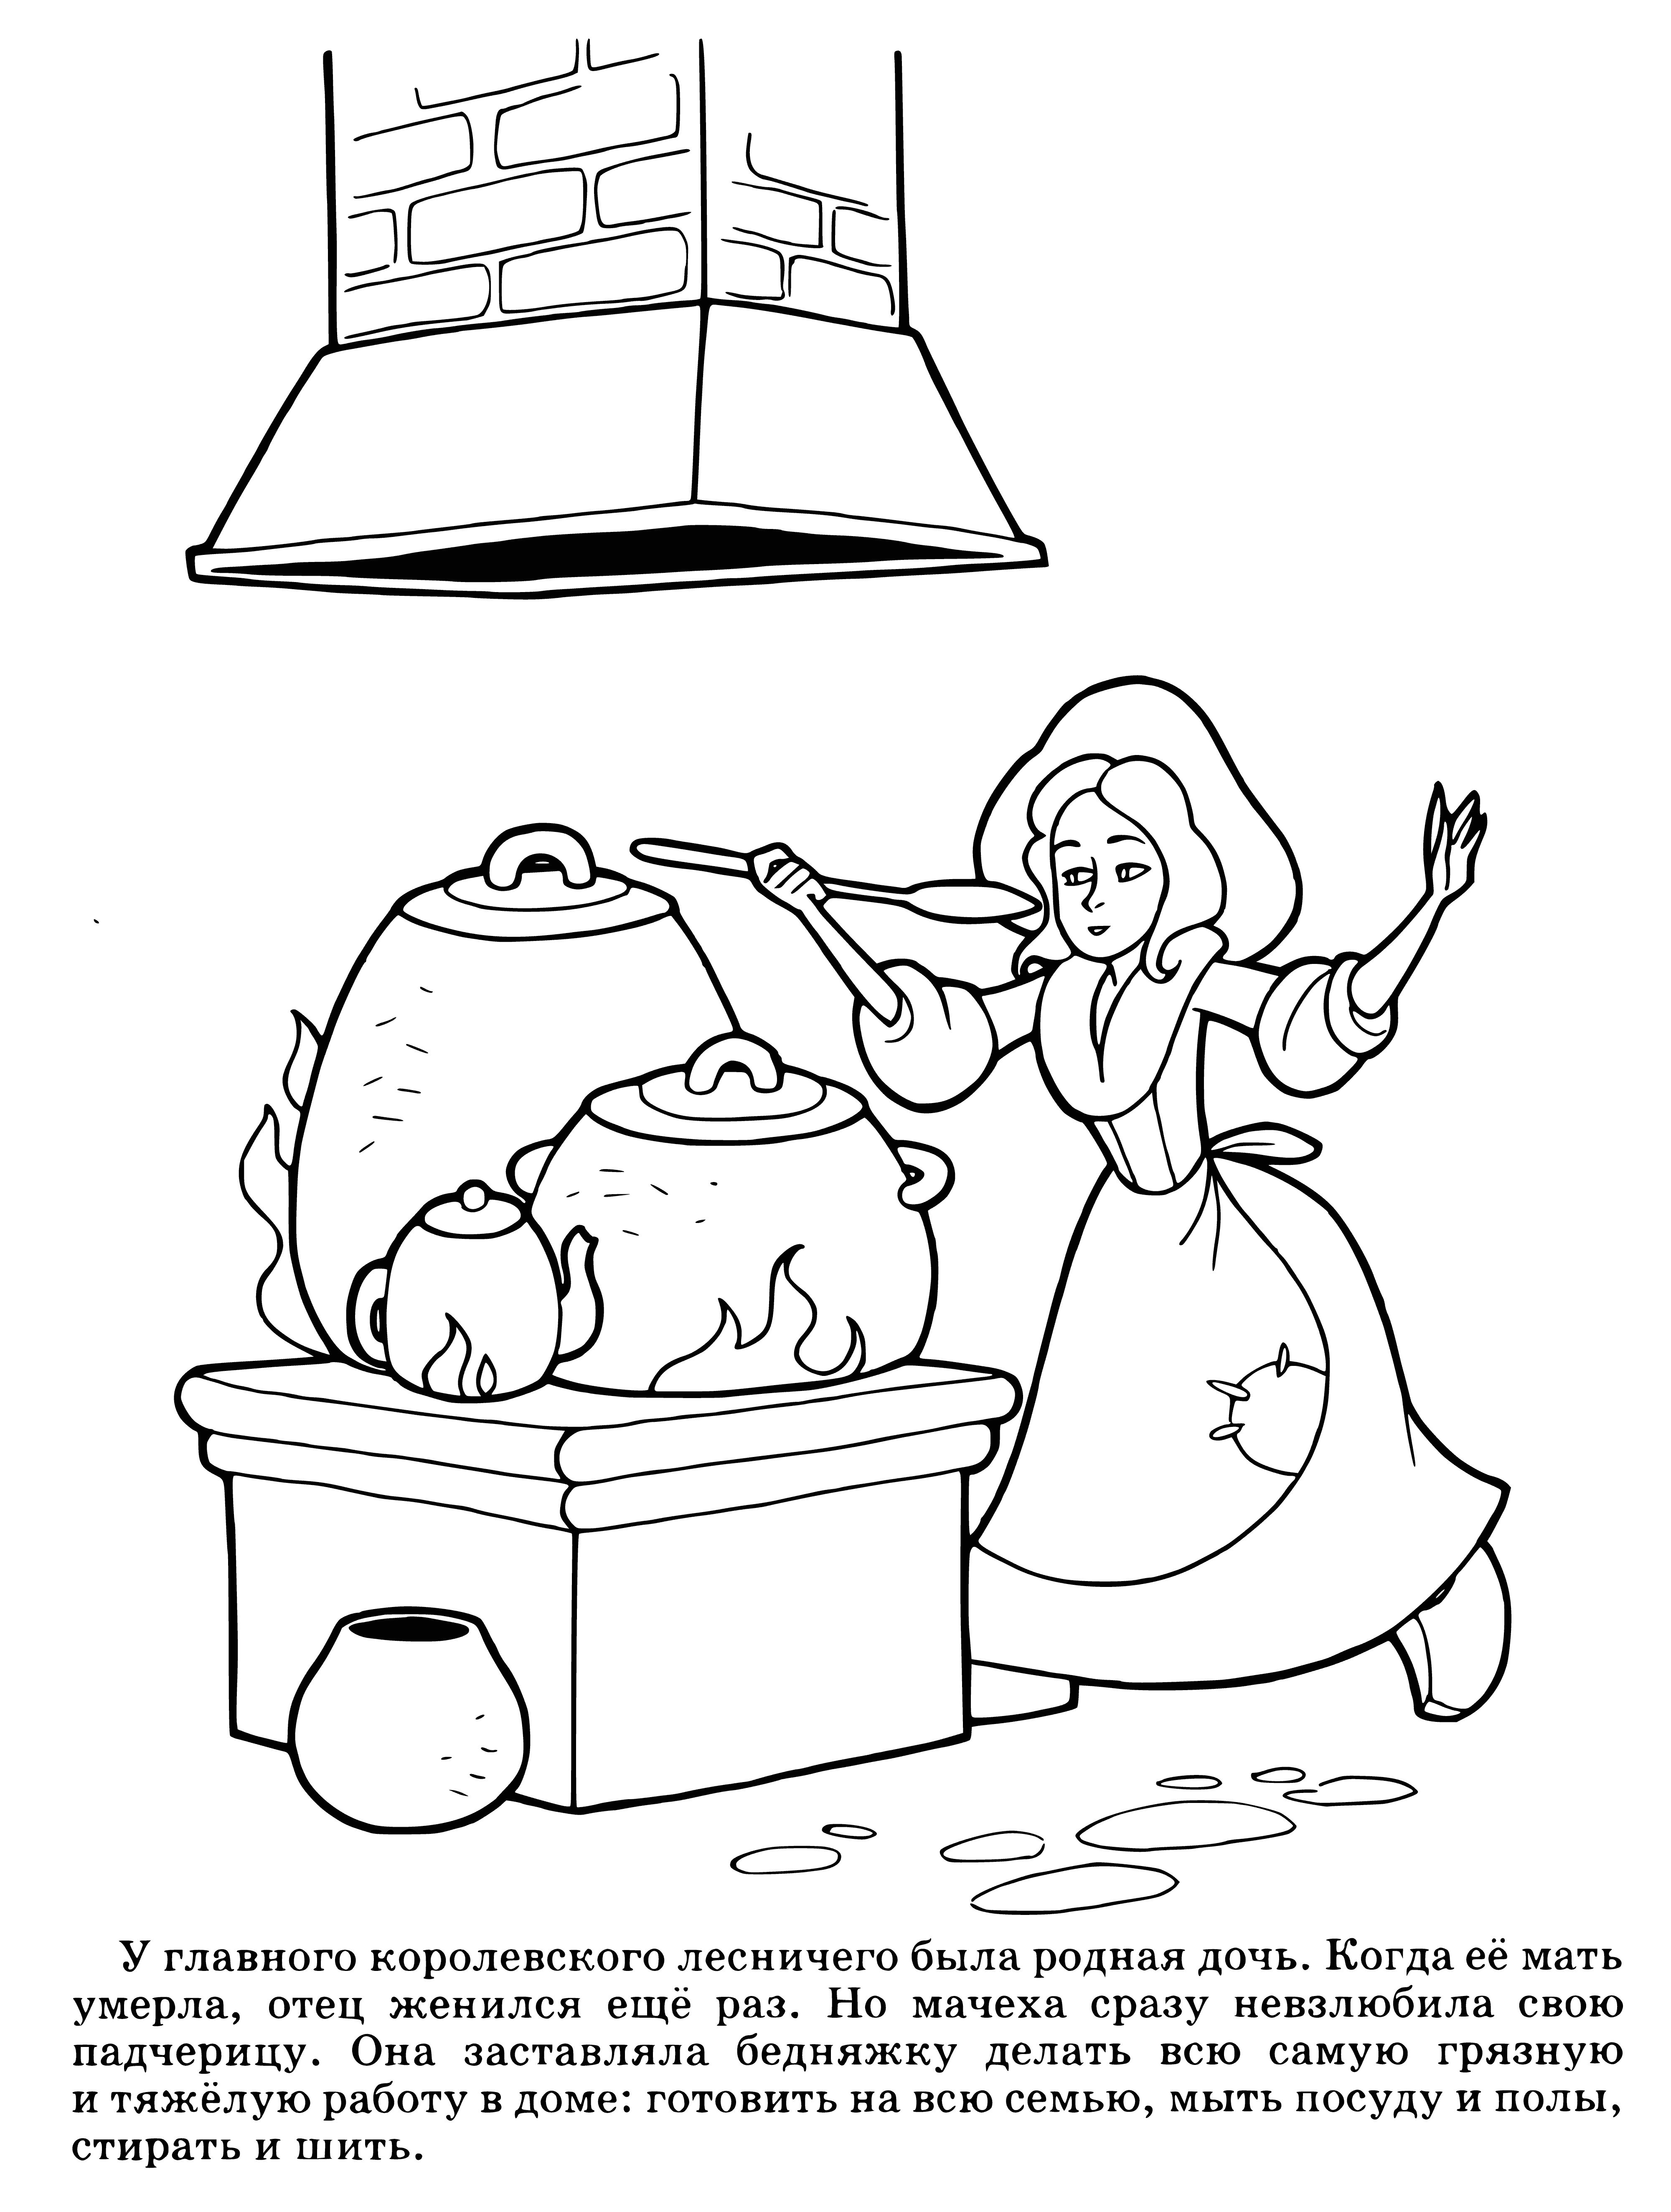 coloring page: Cinderella serves food & drinks to a woman in a fancy dress & crown, by a warm fire, with a book in her lap.